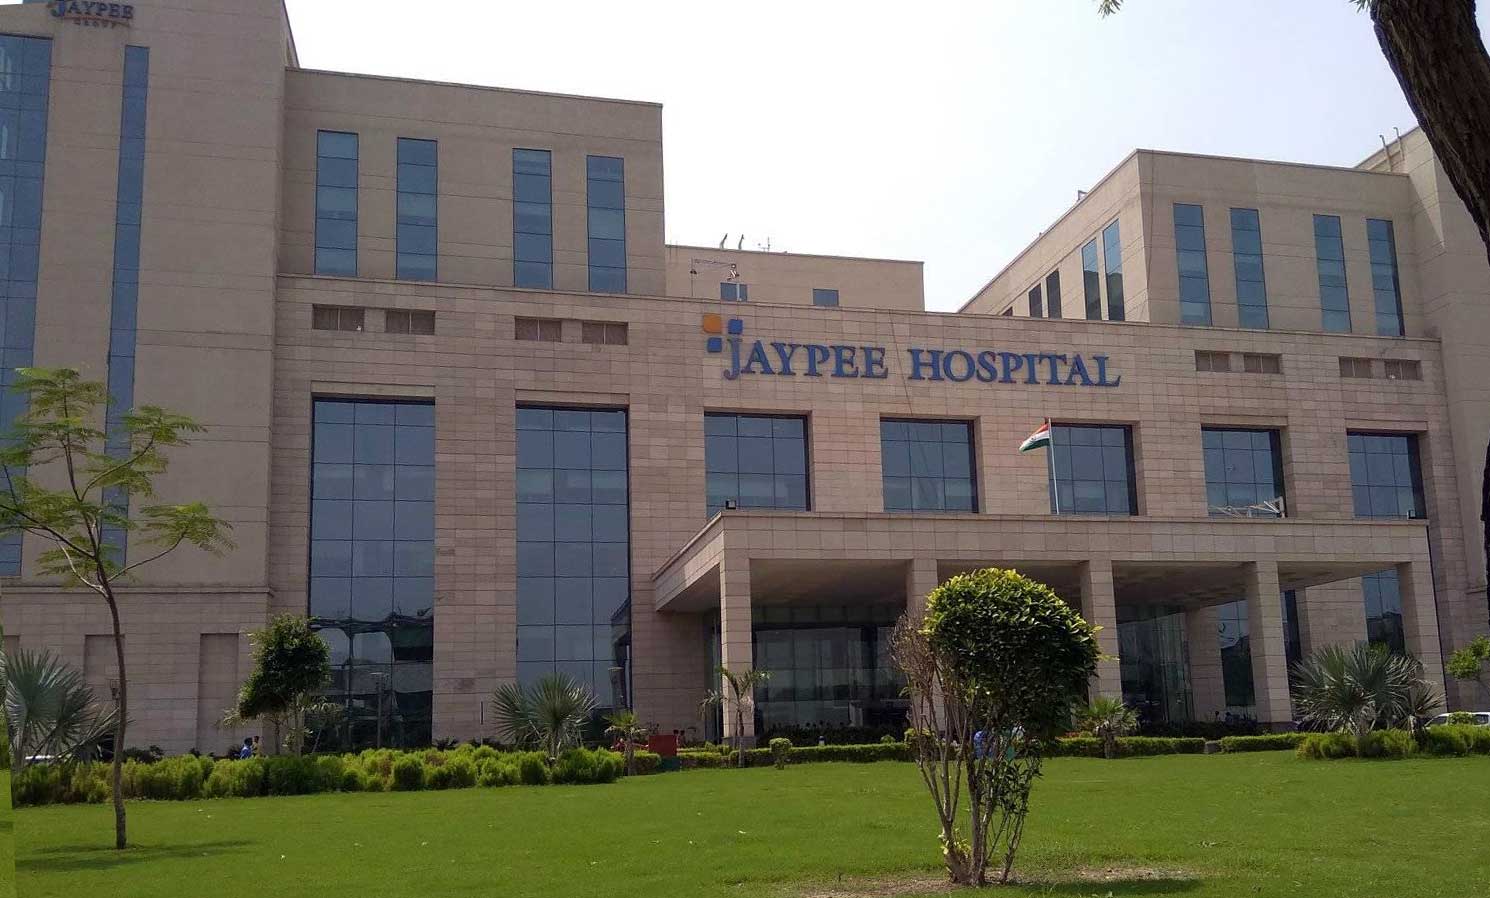 How Jaypee Hospital Is Using 3D Imaging Technology To Improve Their Interventional Radiology Procedures